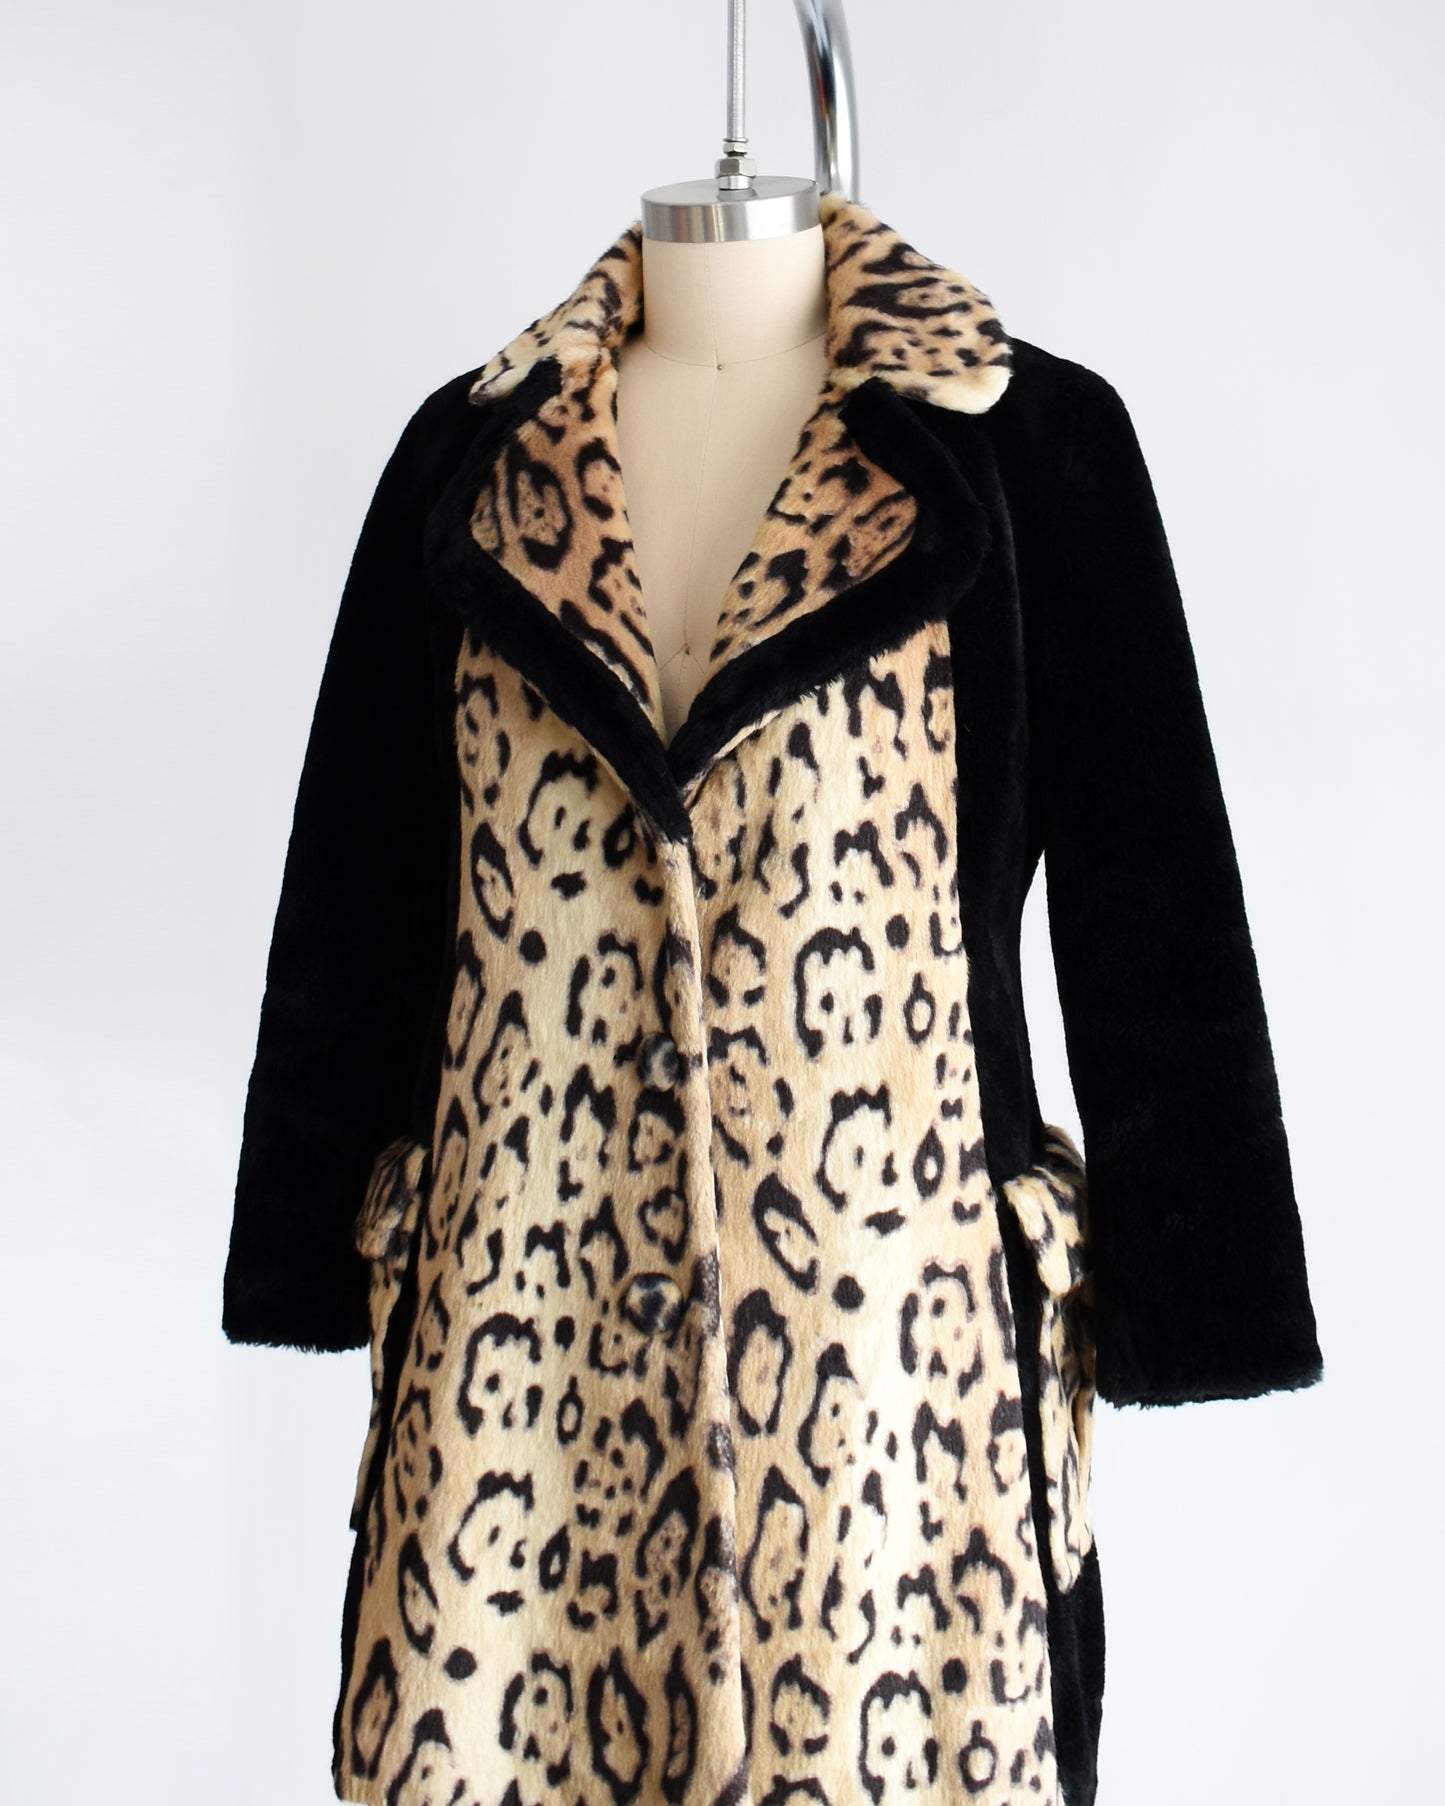 Side front view of a vintage late 1960s early 1970s leopard faux fur coat that has large leopard print on the collar, down the front, and on the large side pockets. Black plush long sleeves, sides, and back. Matching black trim on the collar